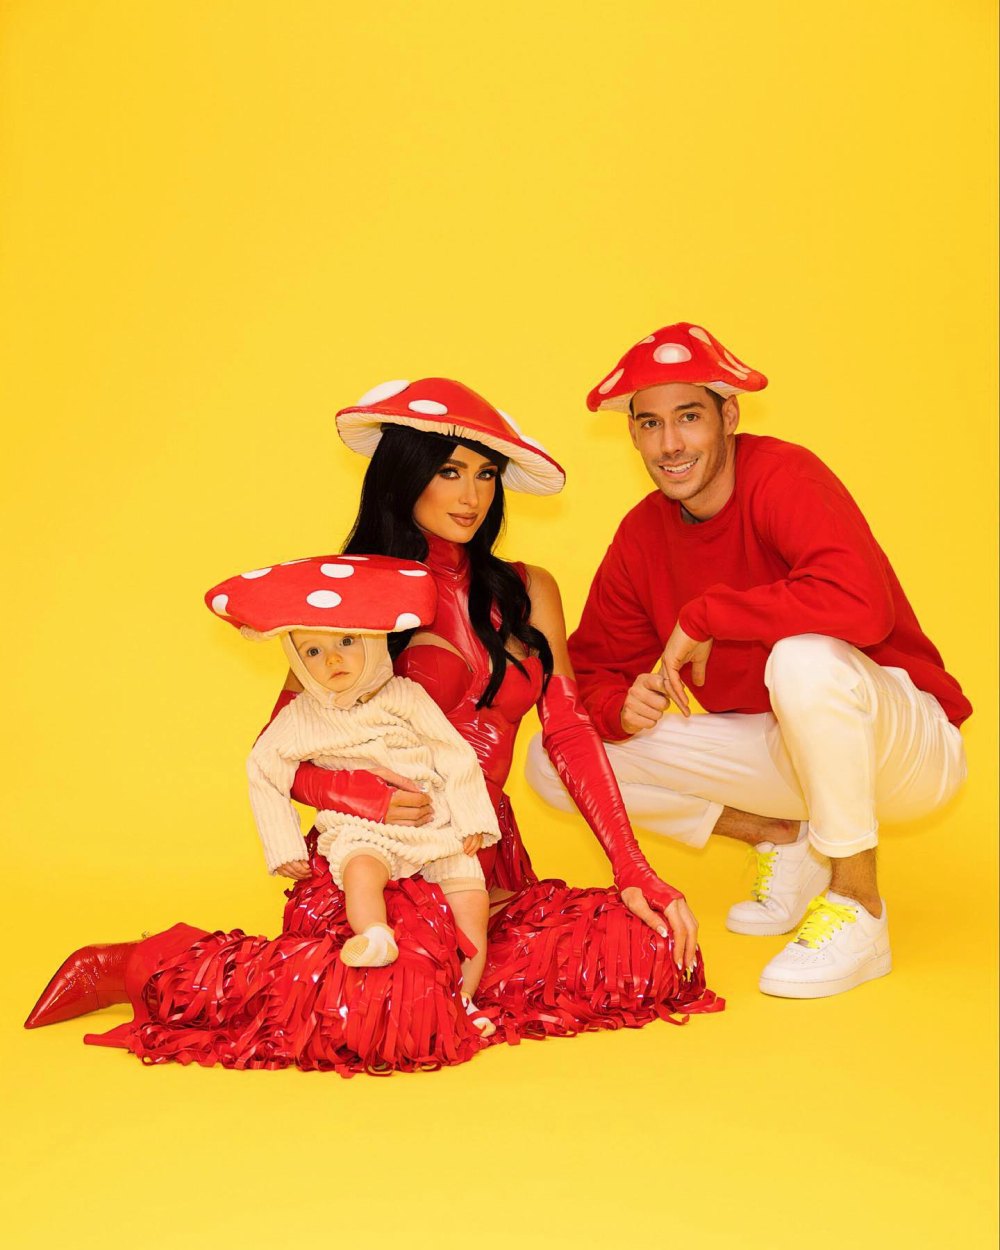 Paris Hilton Has a Ton of Fungi With Family in Katy Perry-Inspired Halloween Outfits 630